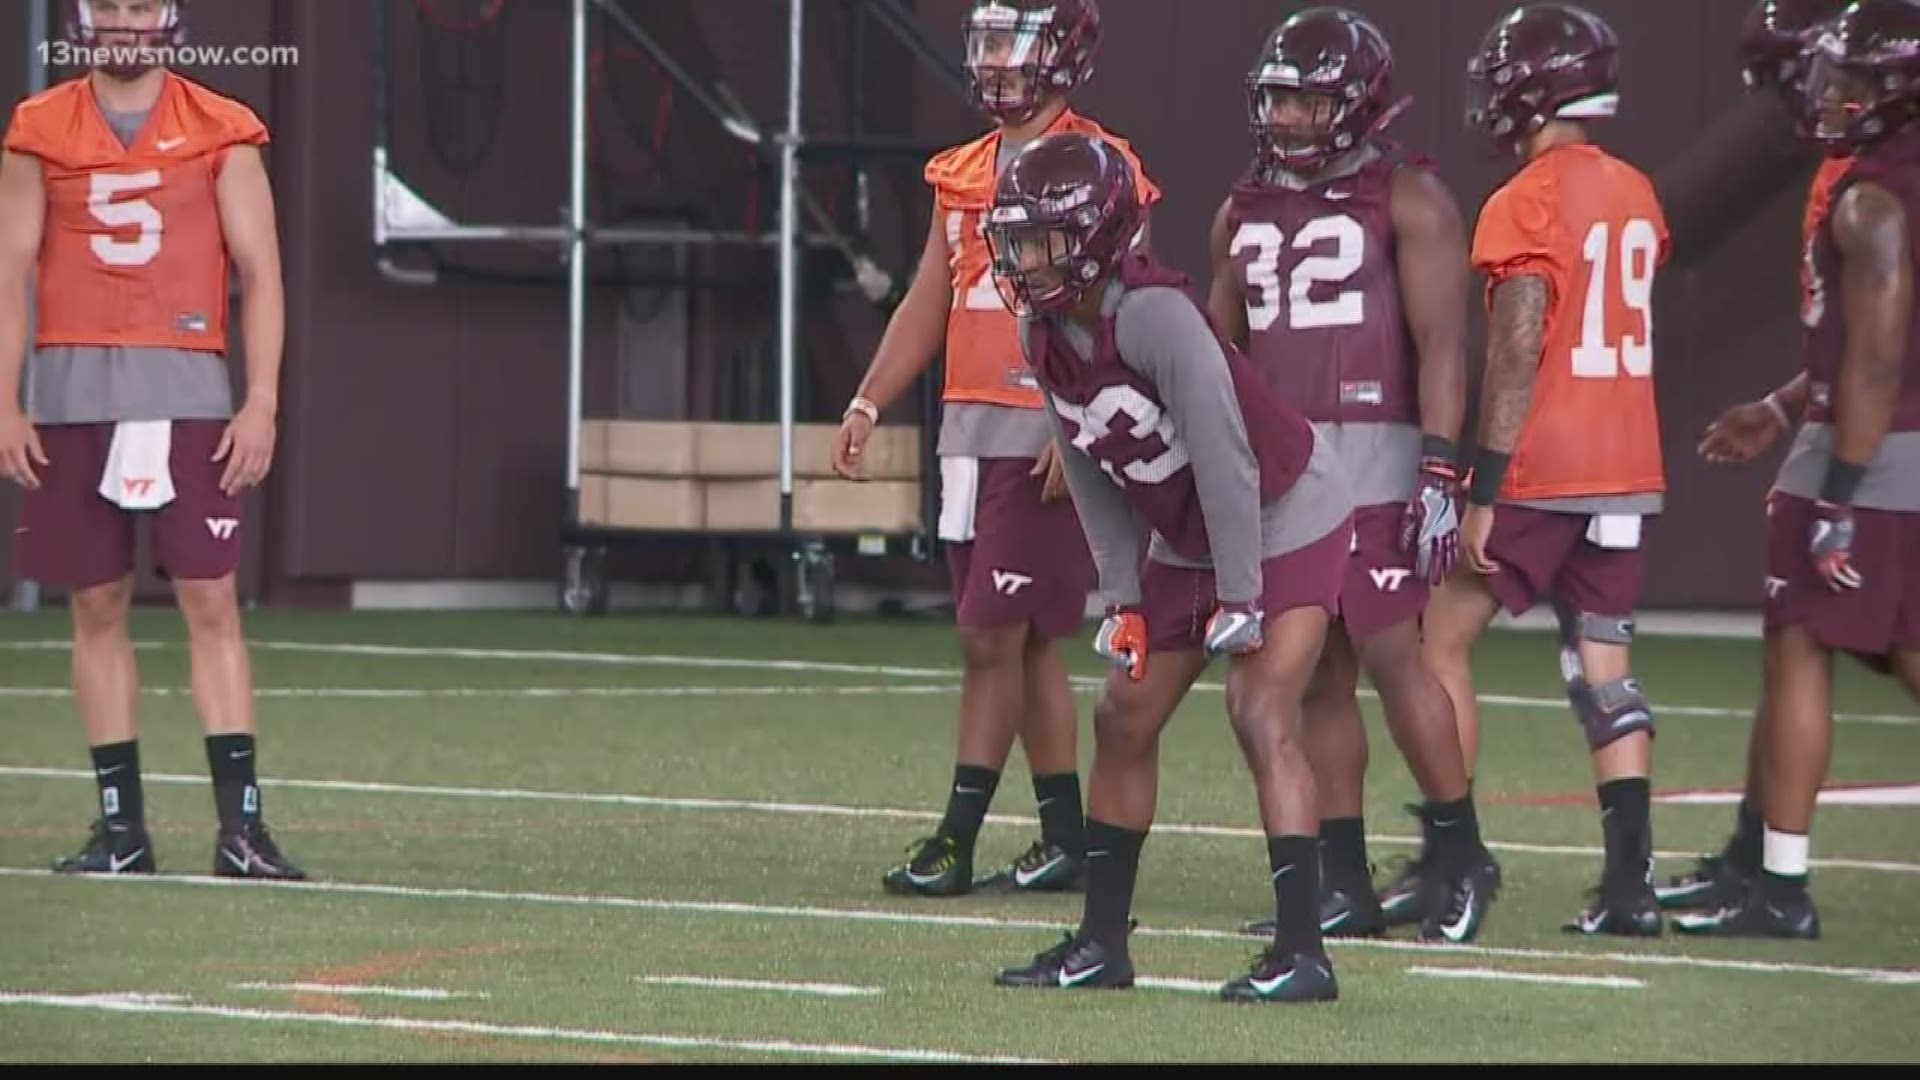 Virginia Tech is hoping to McClease, an Oscar Smith alum, can bring major production to the Hokies running attack.